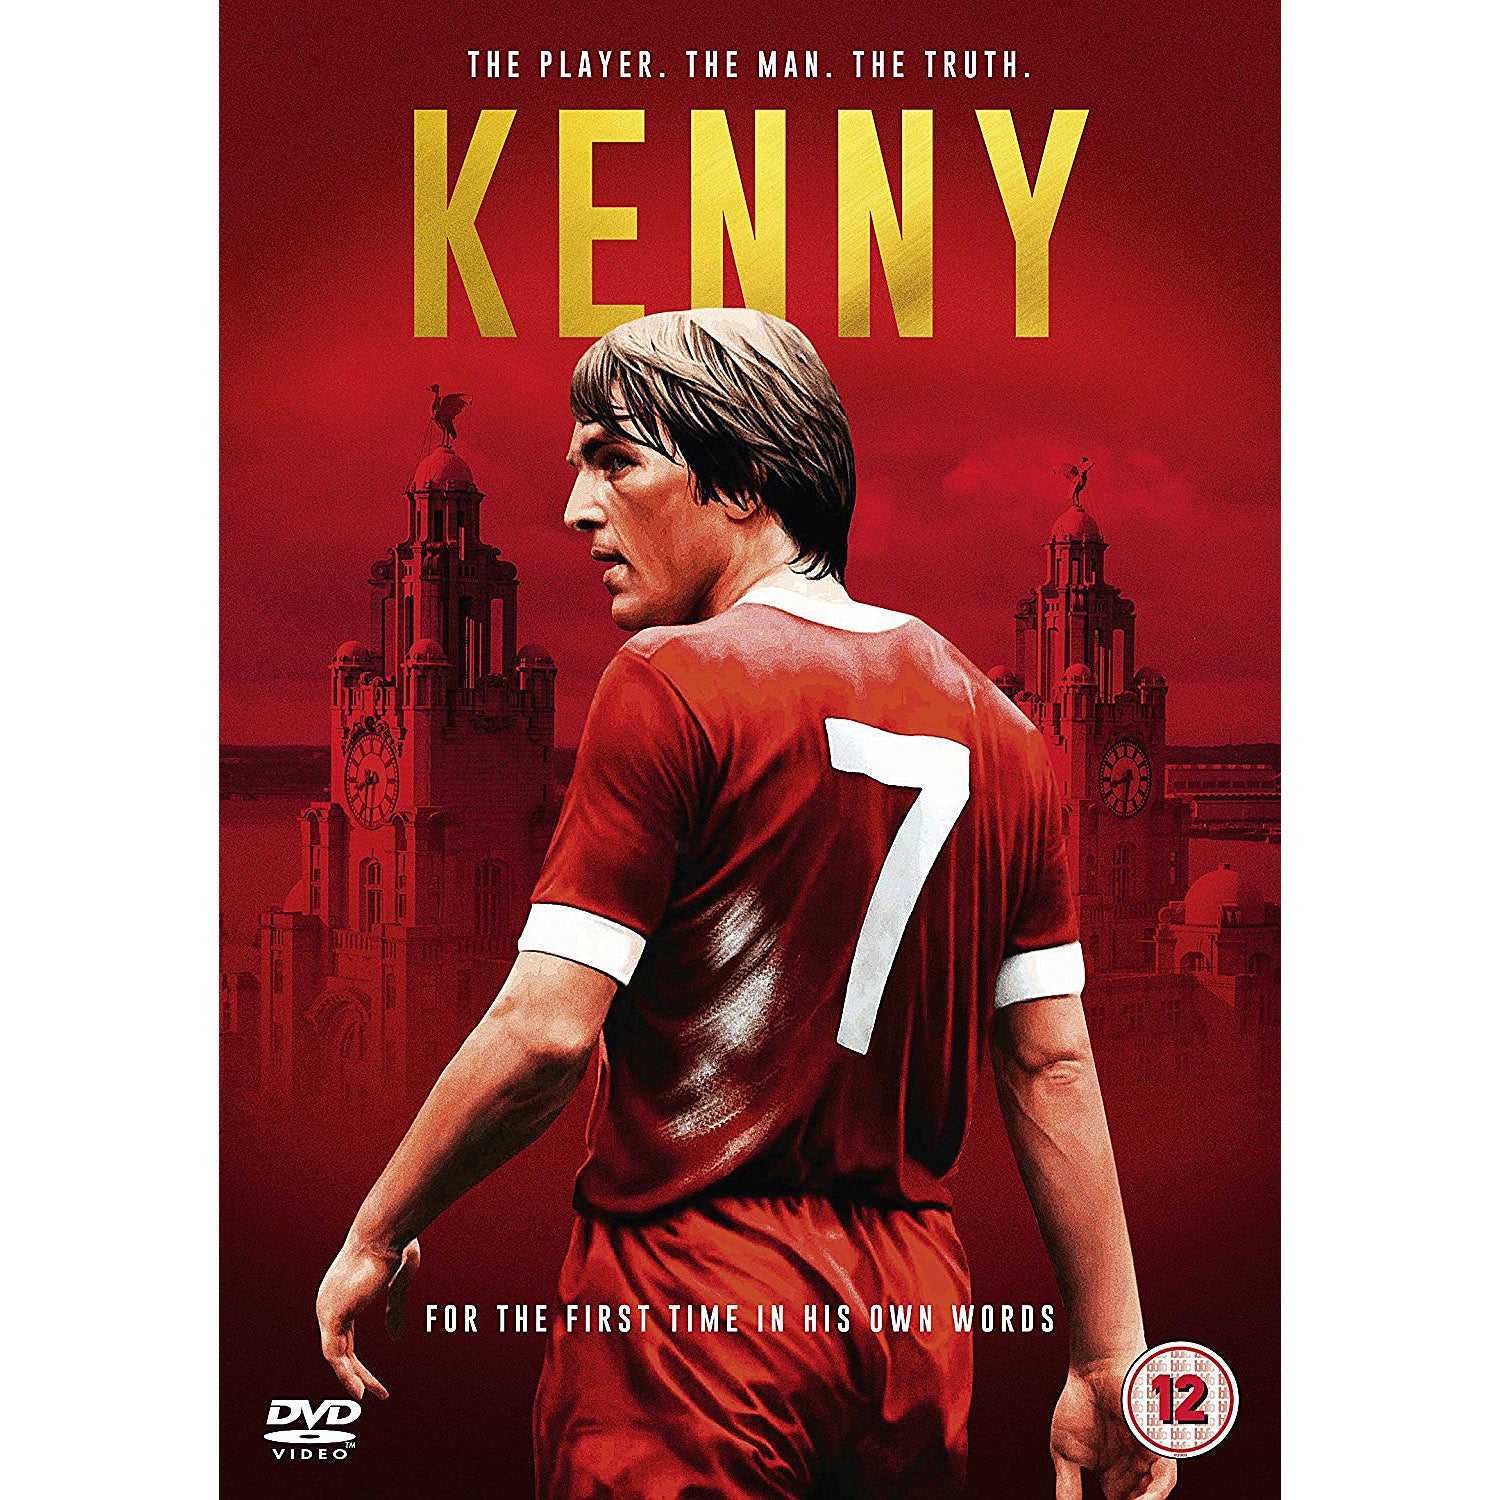 Kenny Dalglish – The Player – The Man – The Truth